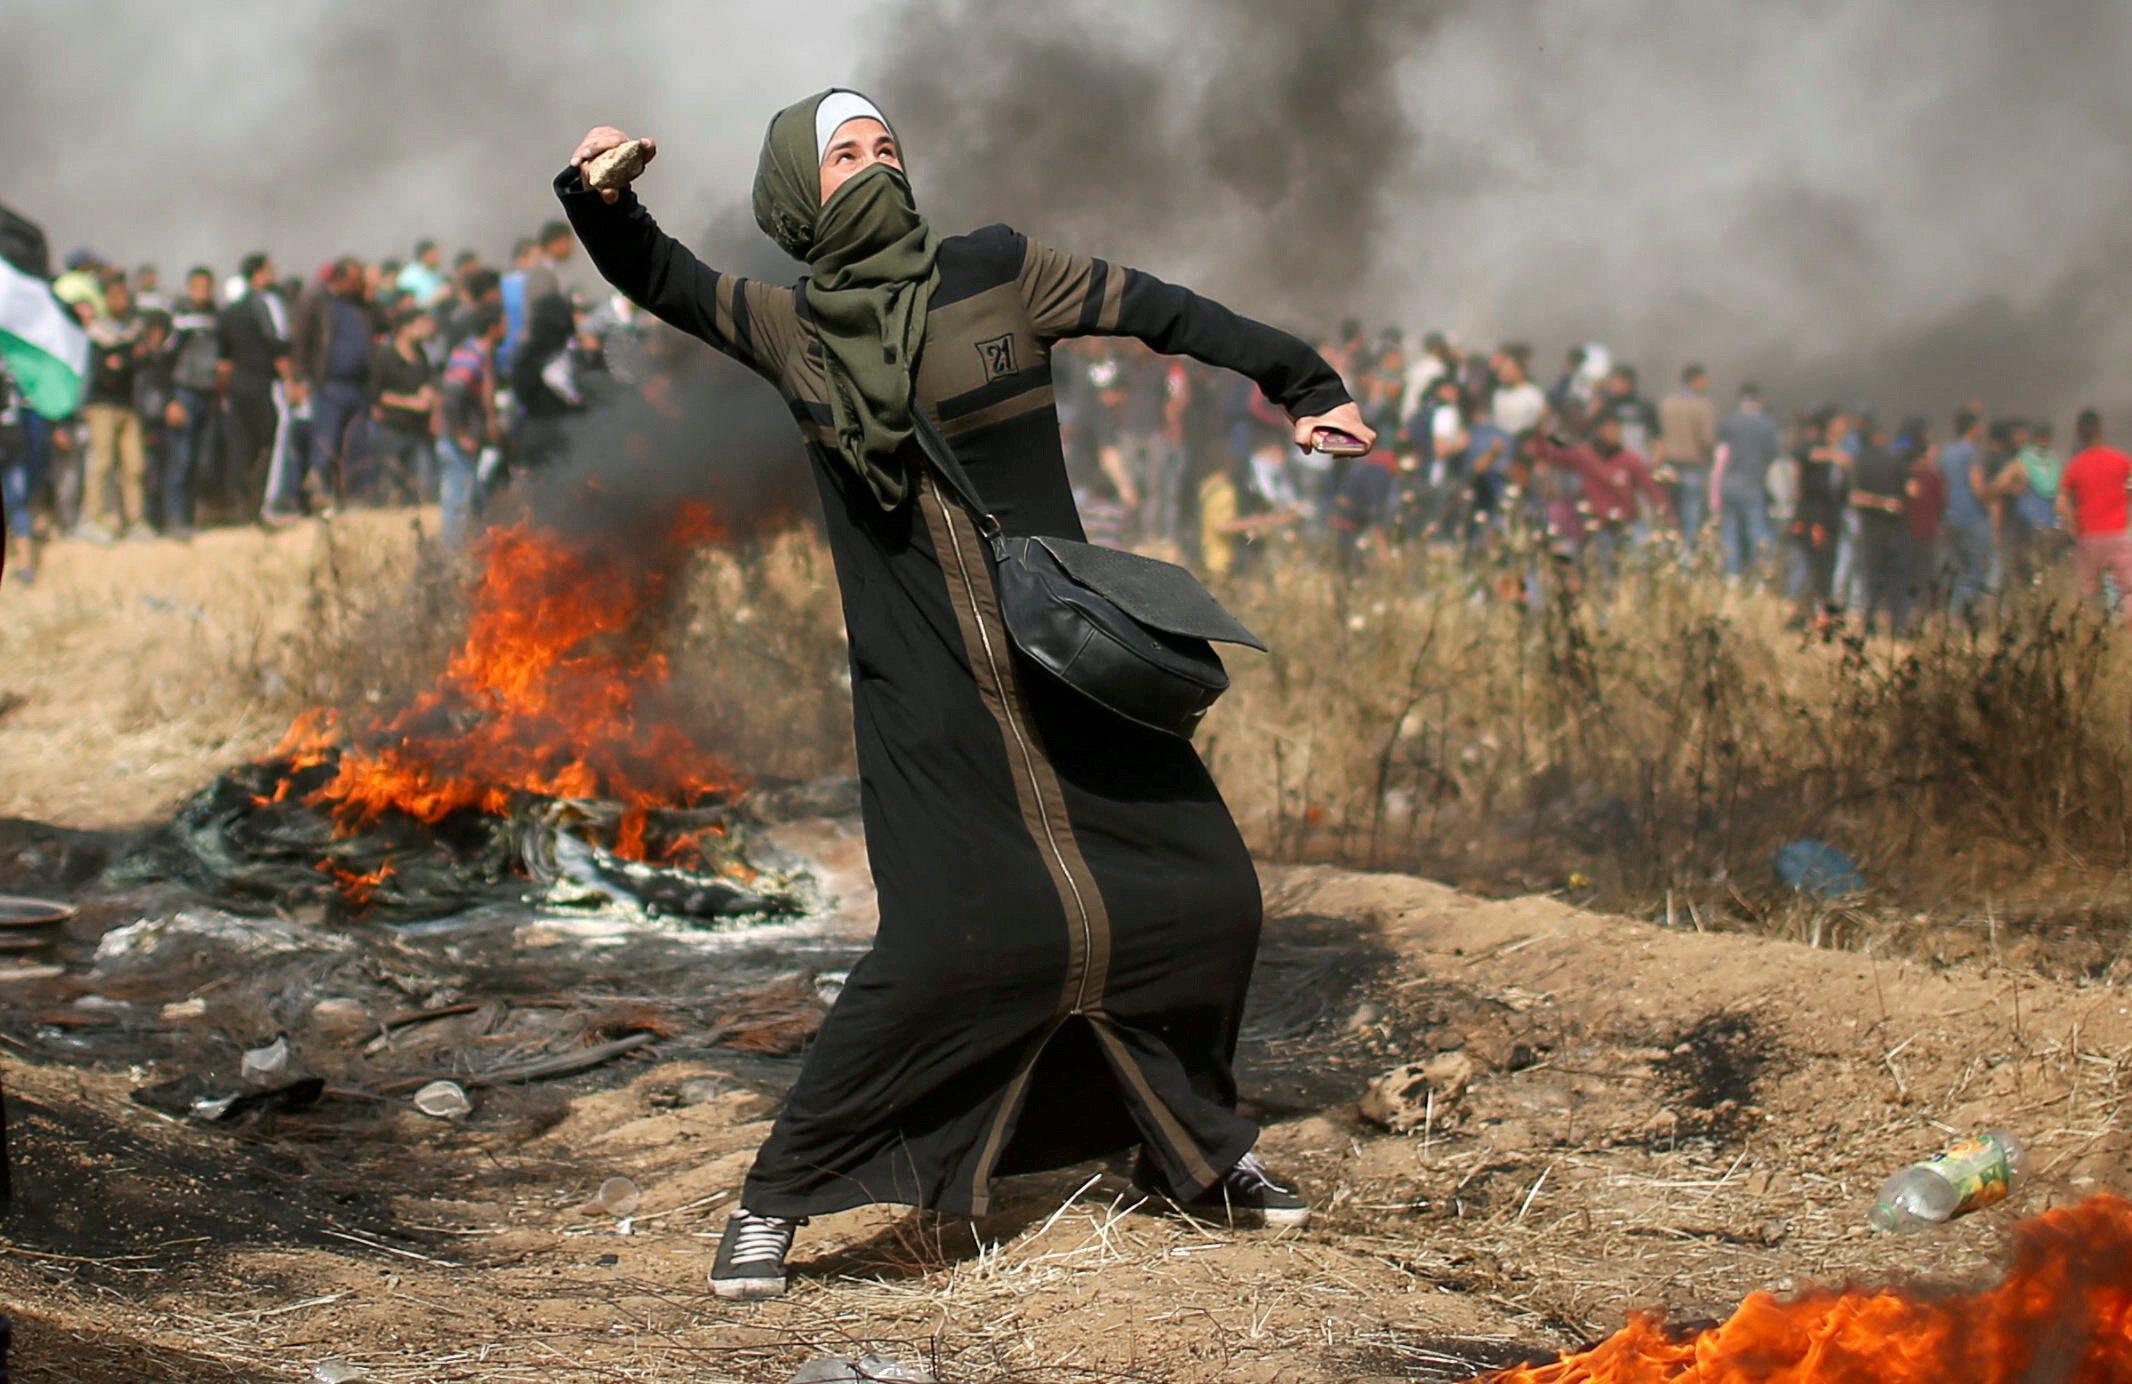 Girl hurls stones during clashes with Israeli troops at a protest where Palestinians demand the righ